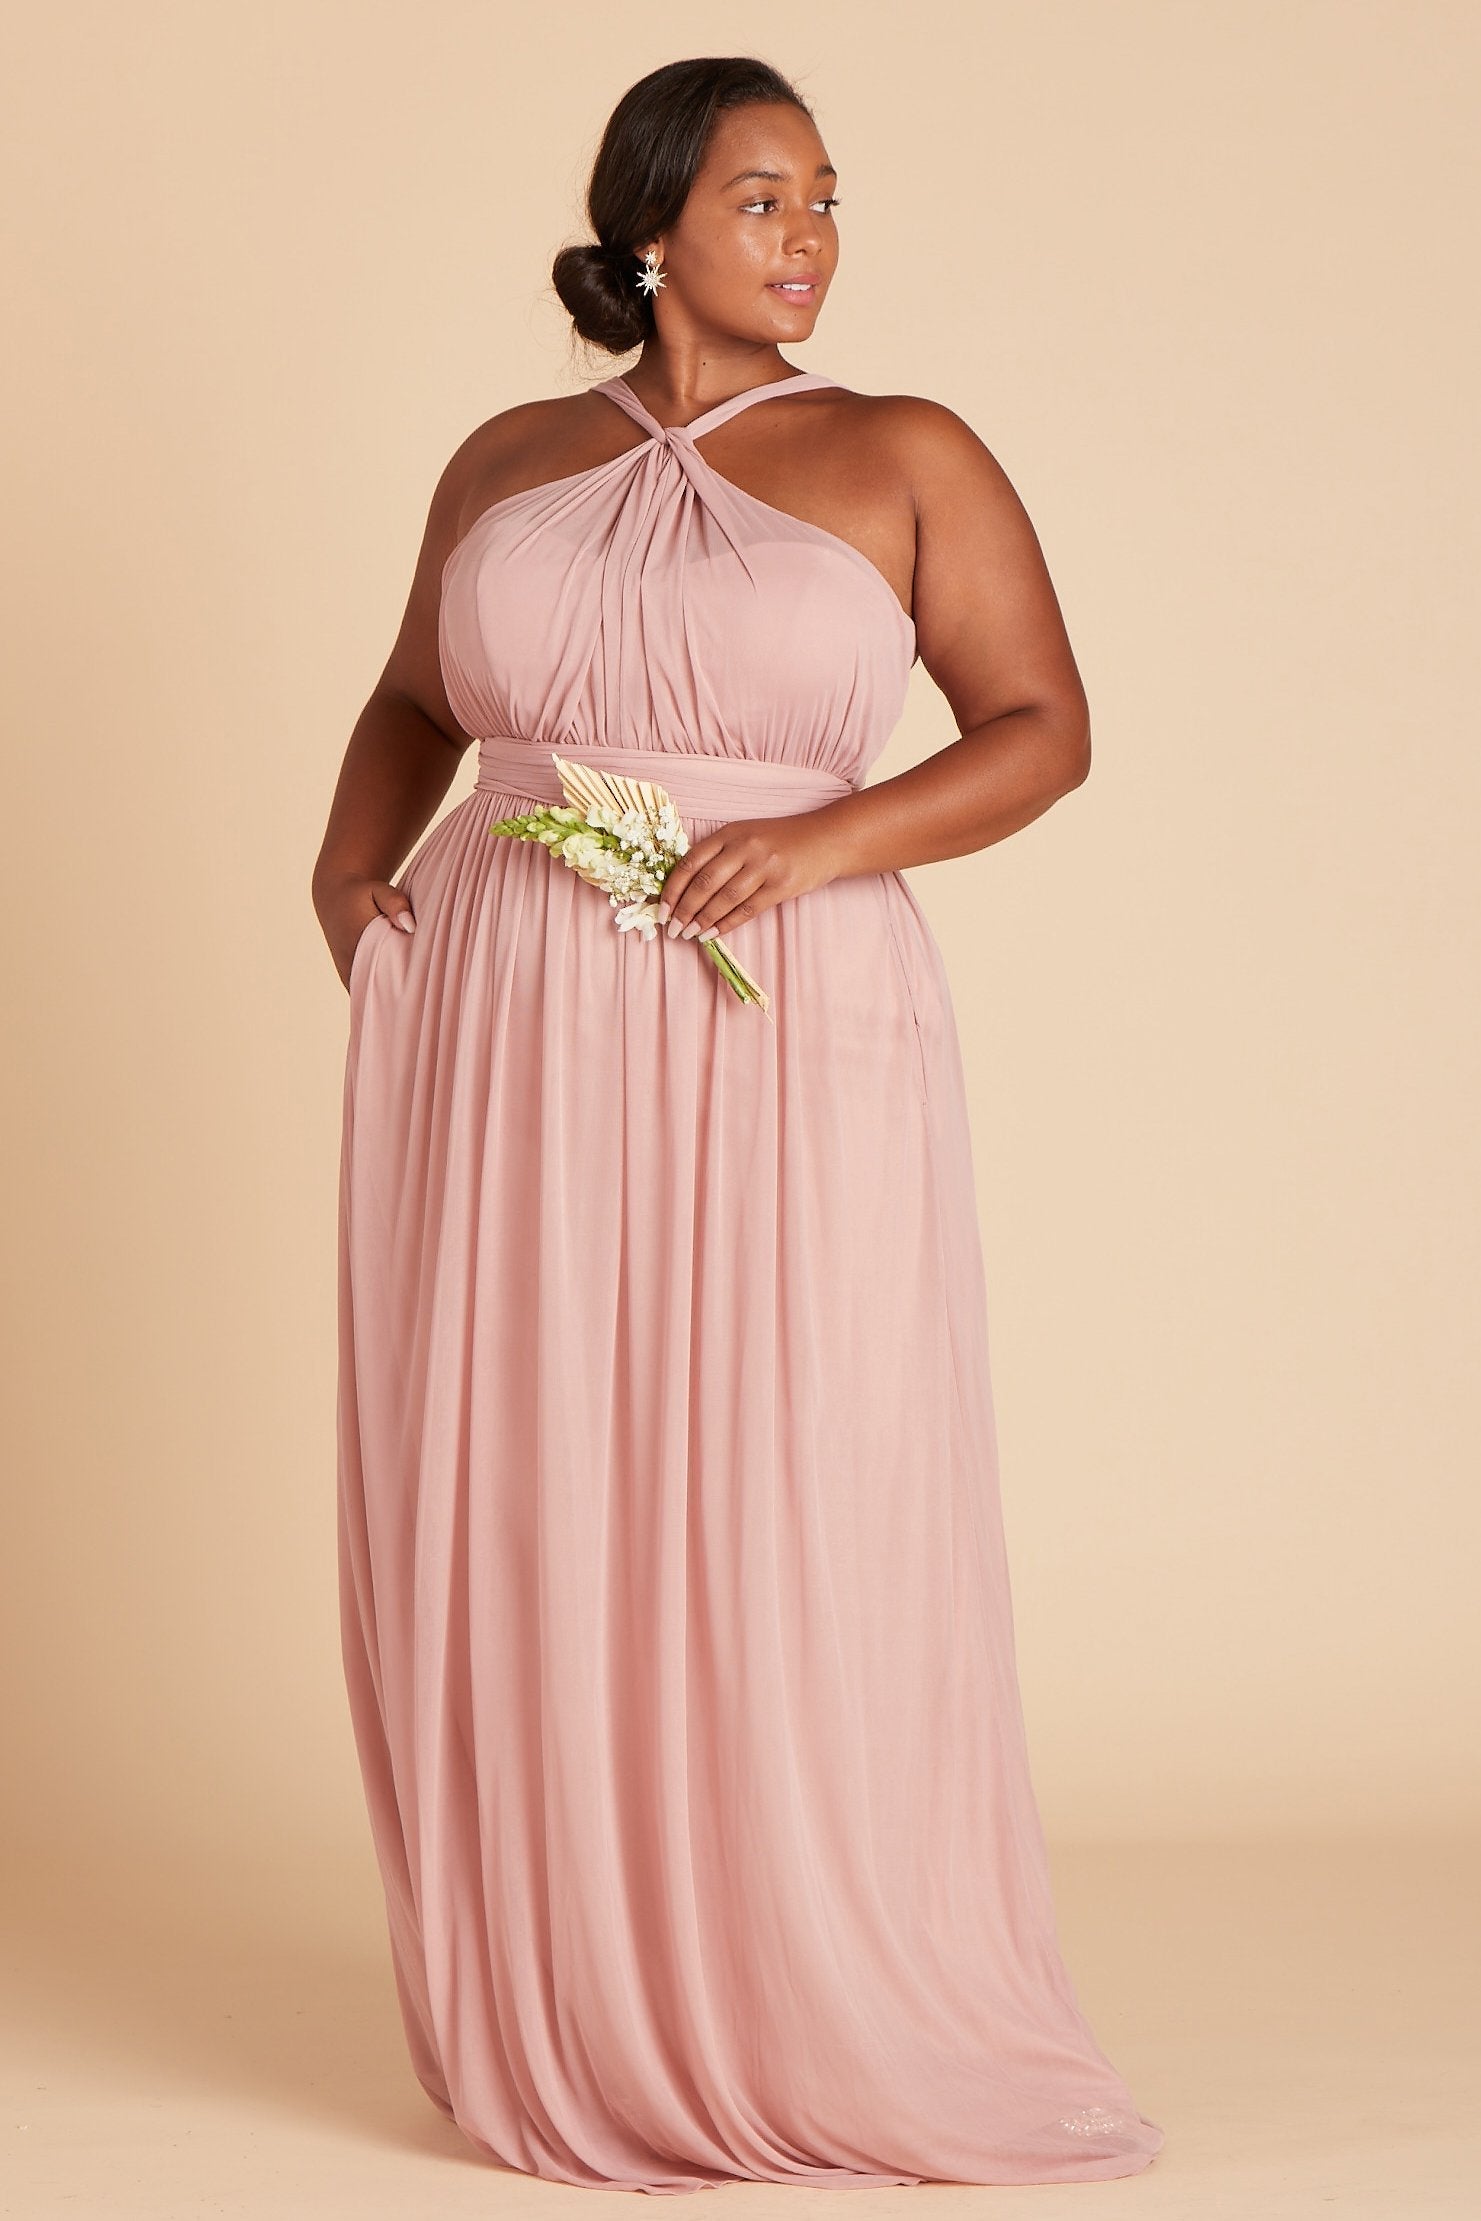 Kiko plus size bridesmaid dress in dusty rose chiffon by Birdy Grey, front view with hand in pocket